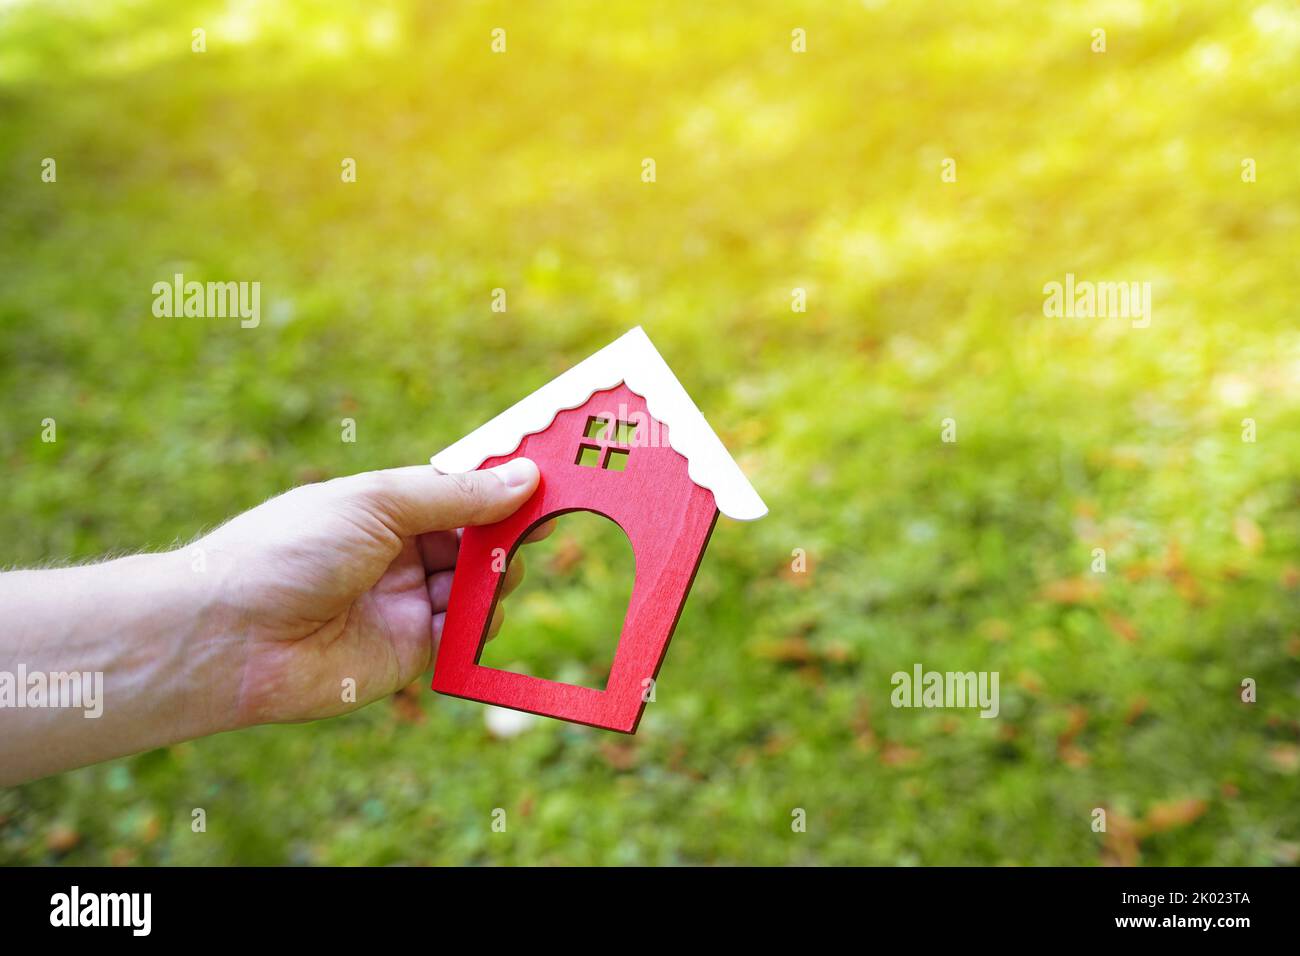 Miniature wooden house in the hands of a man outdoors. Real estate concept. Eco-friendly home. Buying a housing outside the city. Red roof. Selective Stock Photo